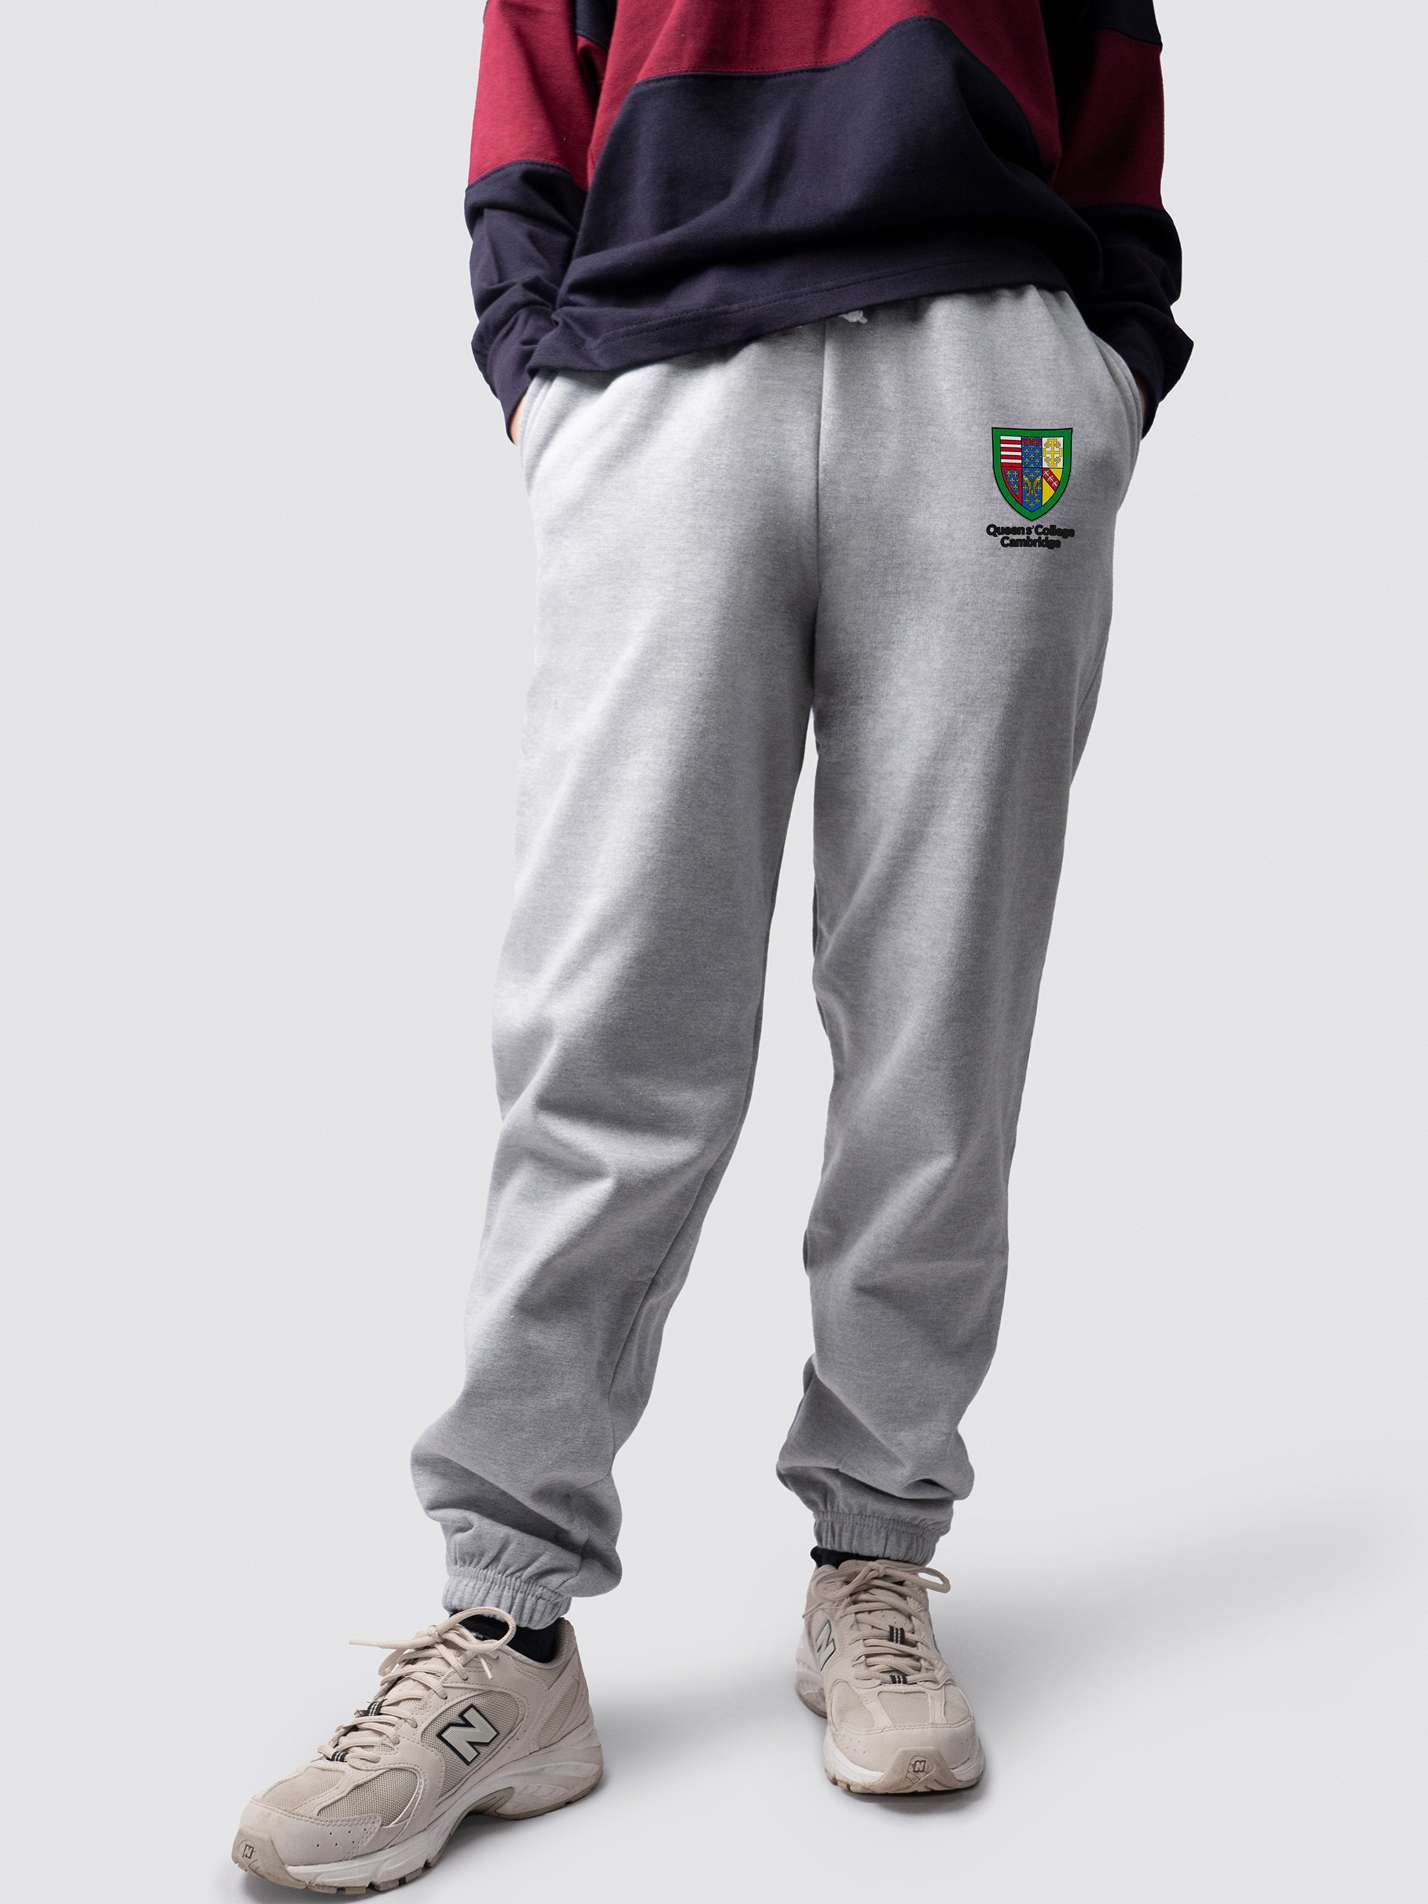 undergraduate cuffed sweatpants, made from soft cotton fabric, with Queens' logo